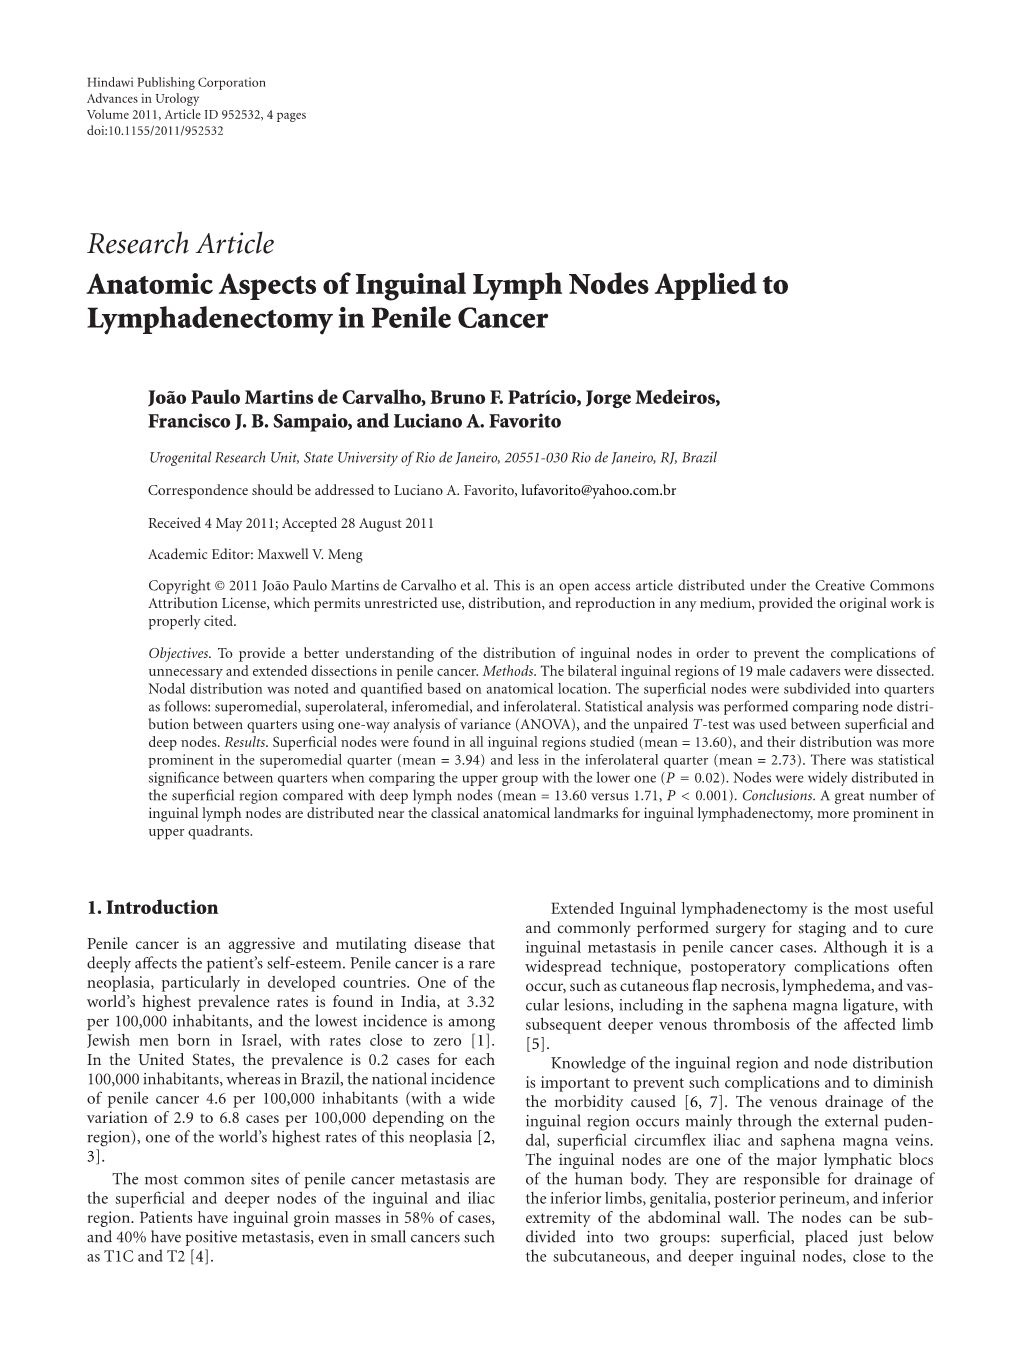 Research Article Anatomic Aspects of Inguinal Lymph Nodes Applied to Lymphadenectomy in Penile Cancer